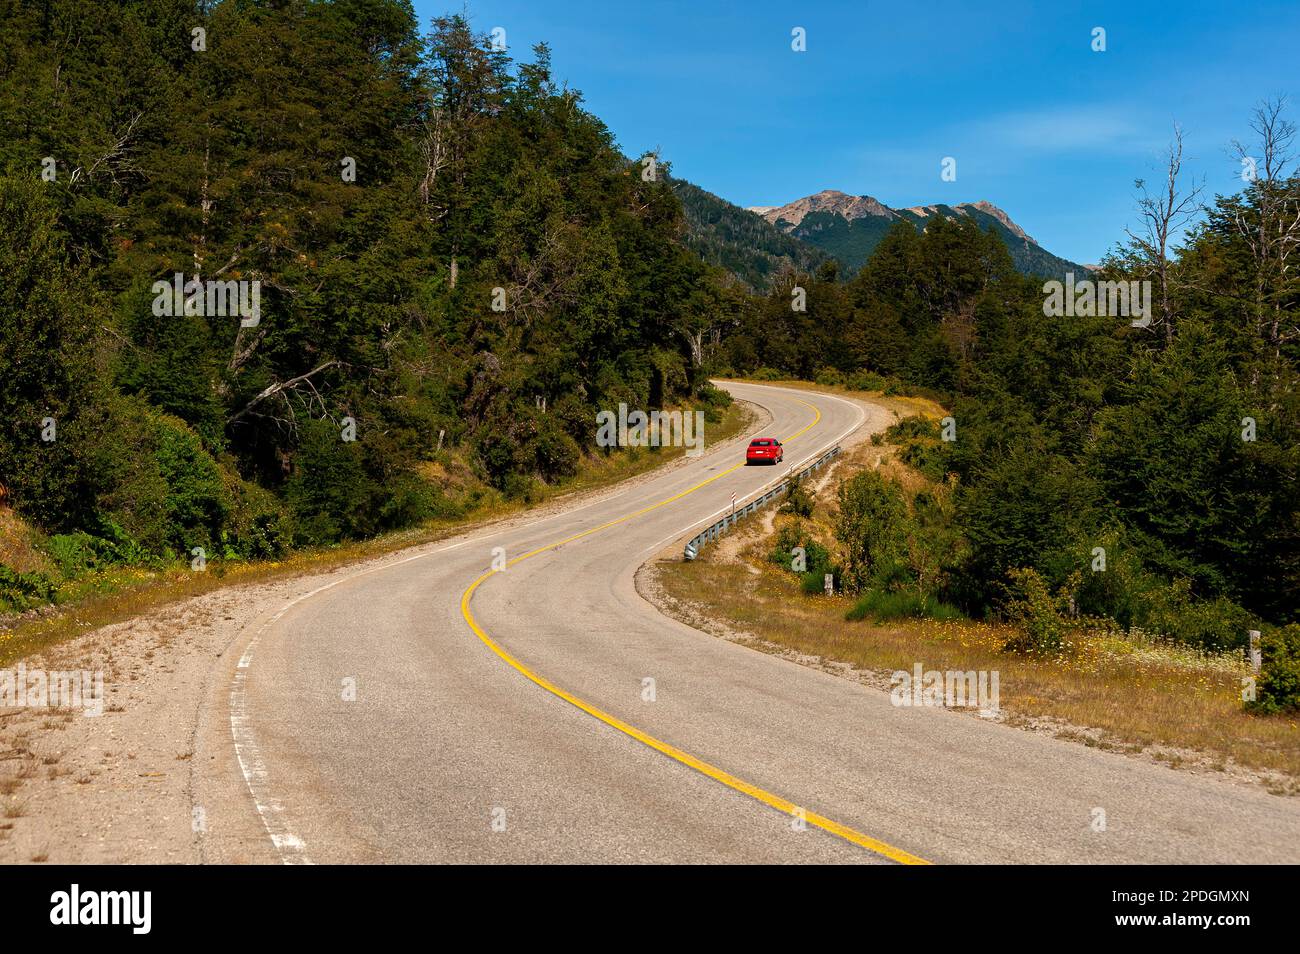 Tourists driving on the beautiful scenery of snowy mountains on Ruta 40, Ruta de Los Siete Lagos or Route of Seven Lakes, Neuquén, Argentina Stock Photo